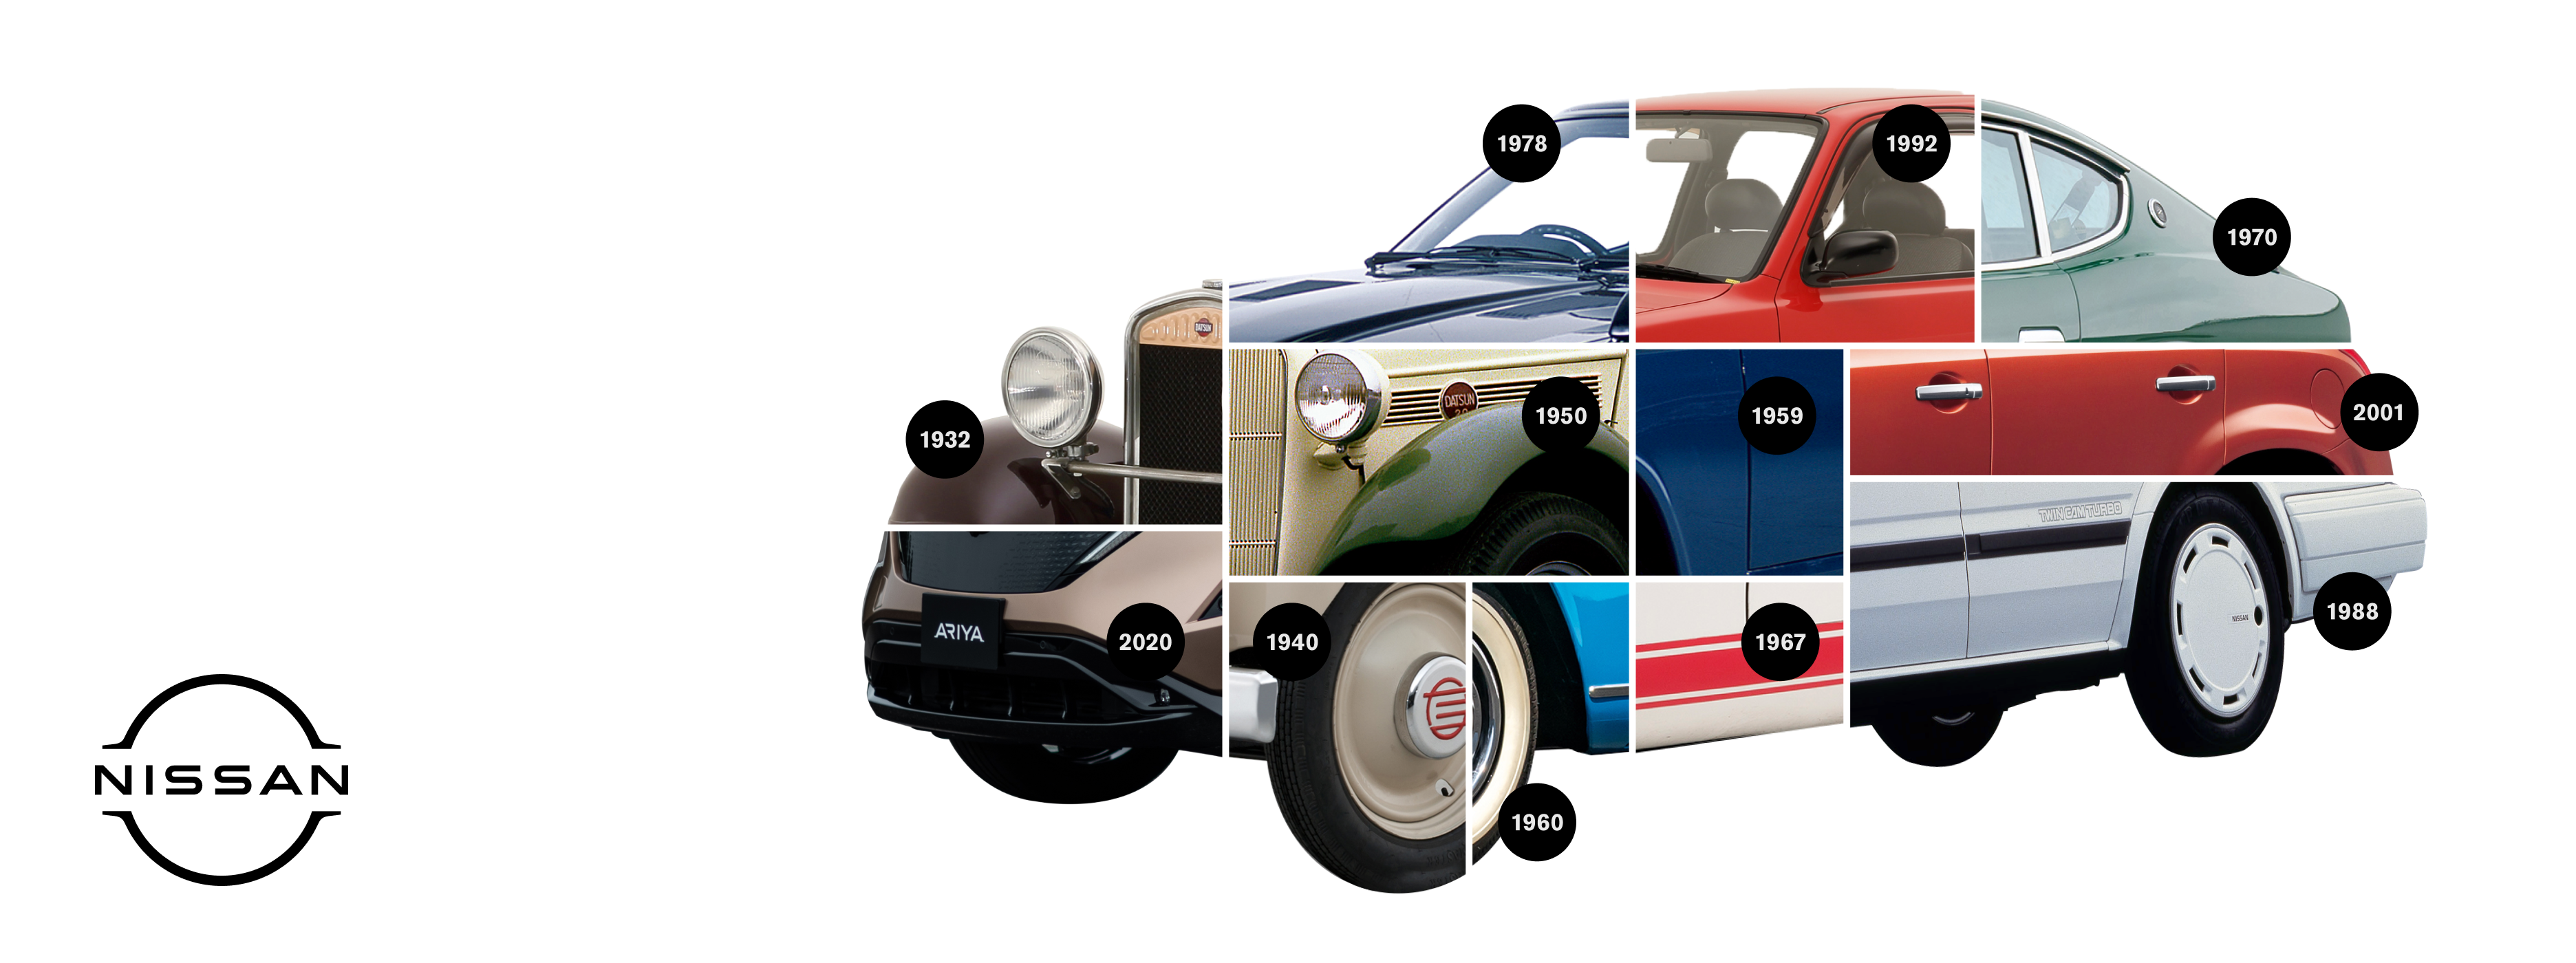 A collage of a car made up of puzzle pieces of other Nissan cars through the ages